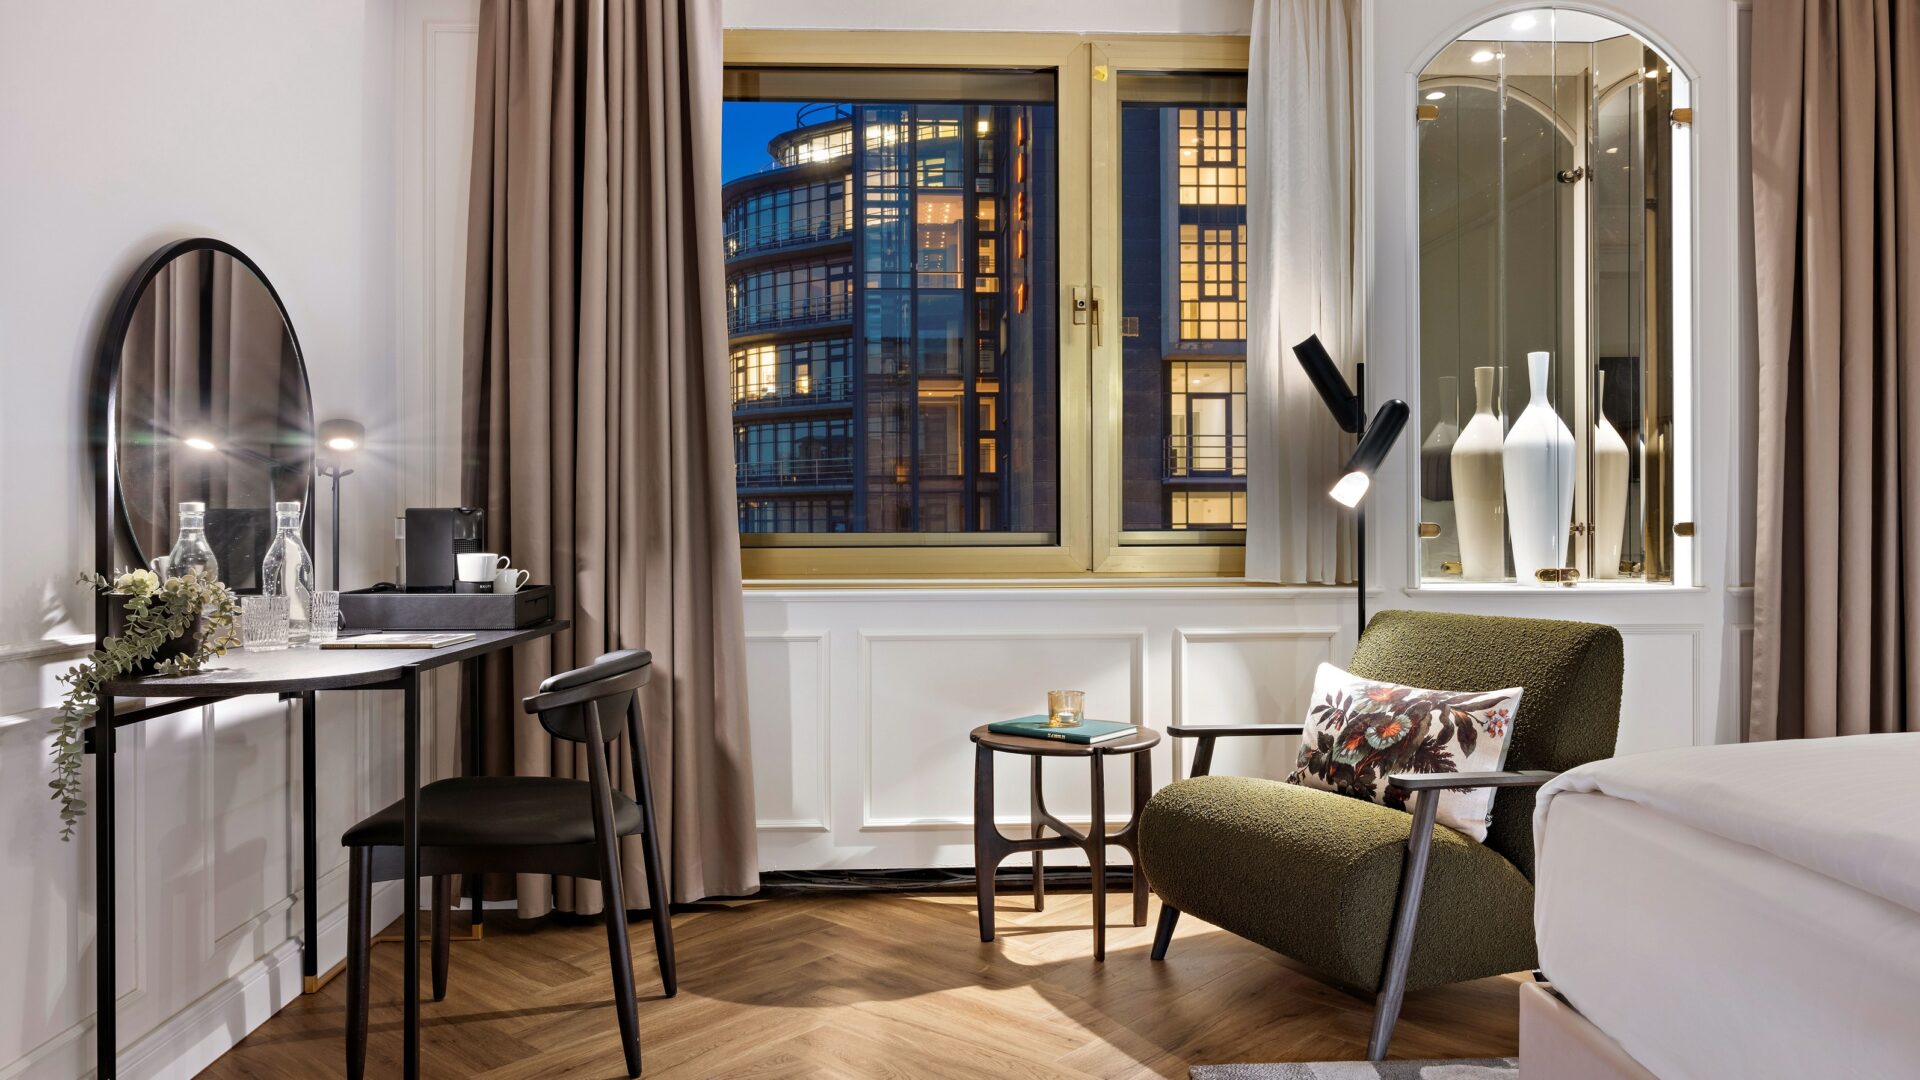 Hotel Bristol Berlin unveils newly renovated rooms